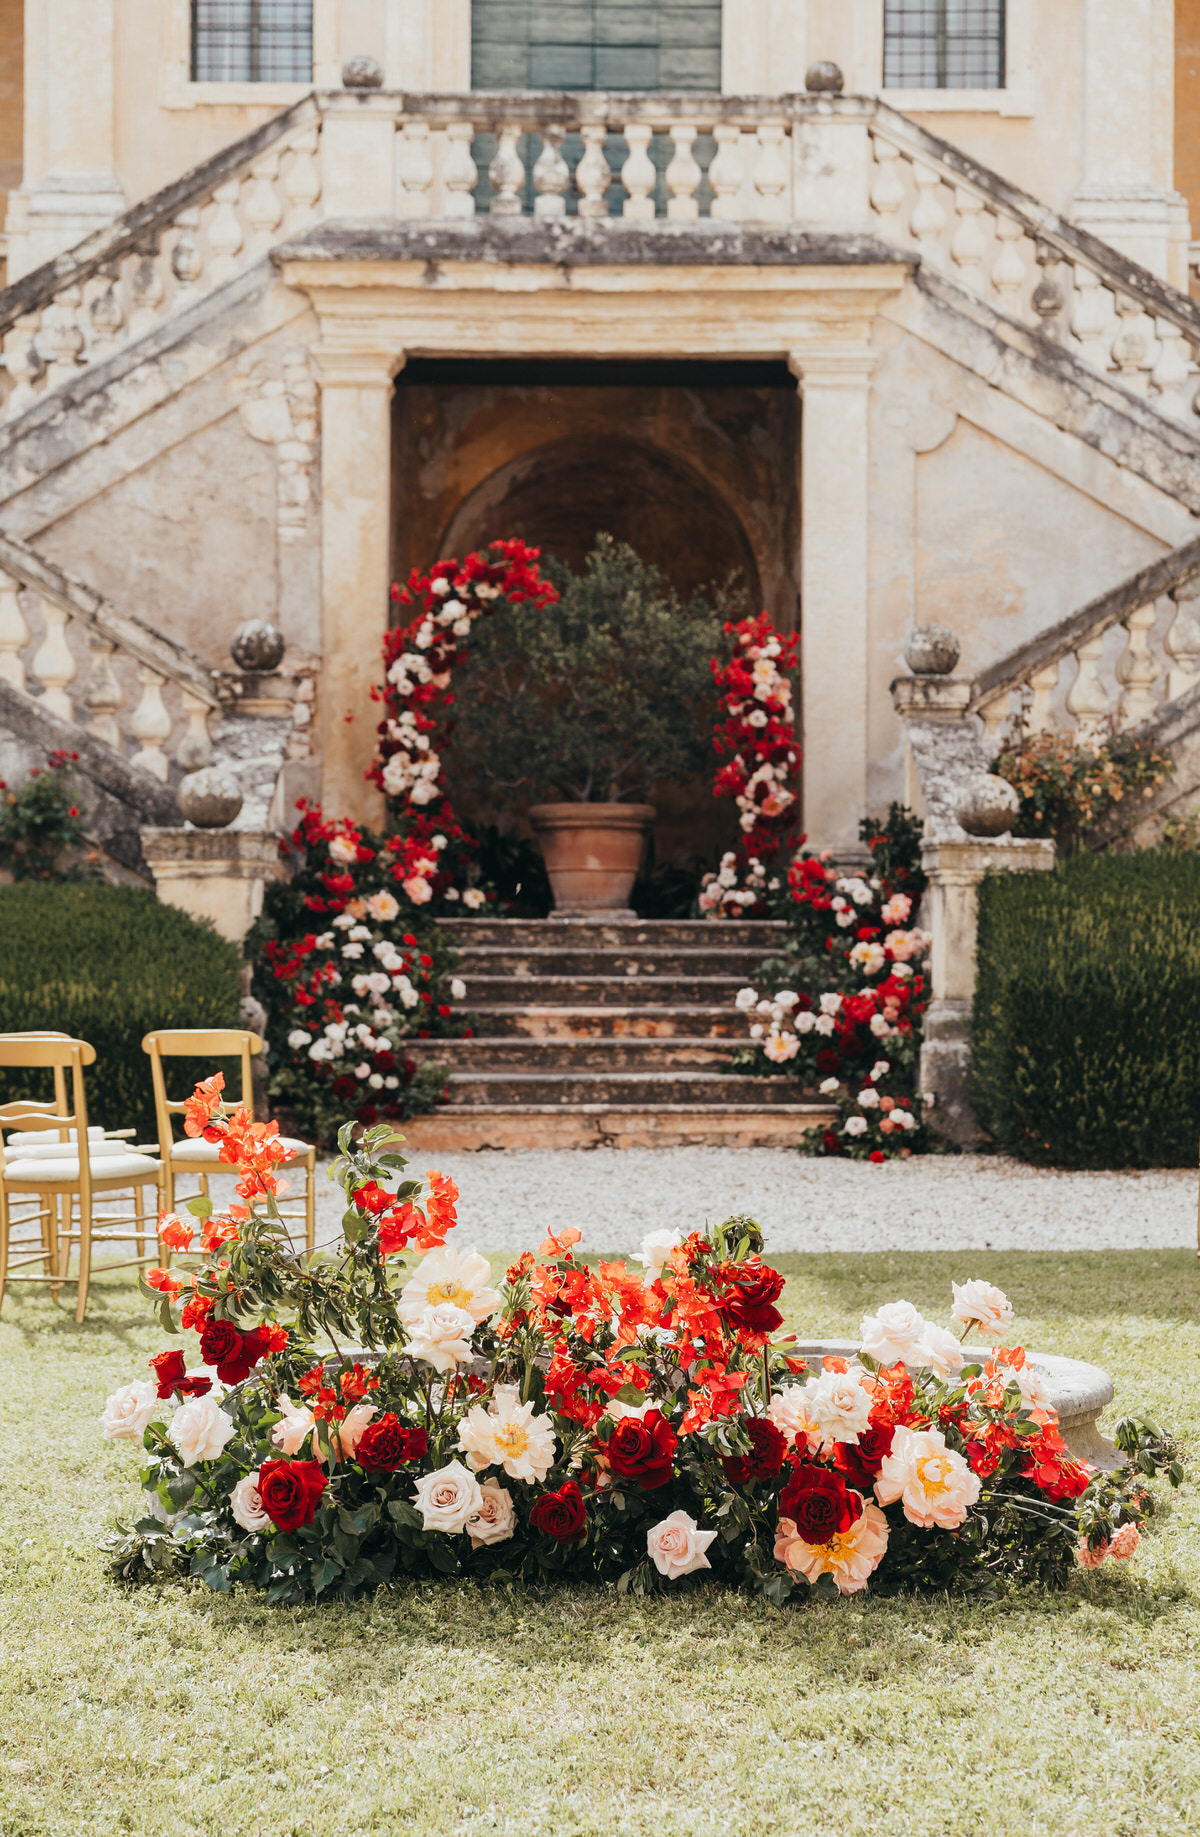 Indian Fusion wedding in Italy